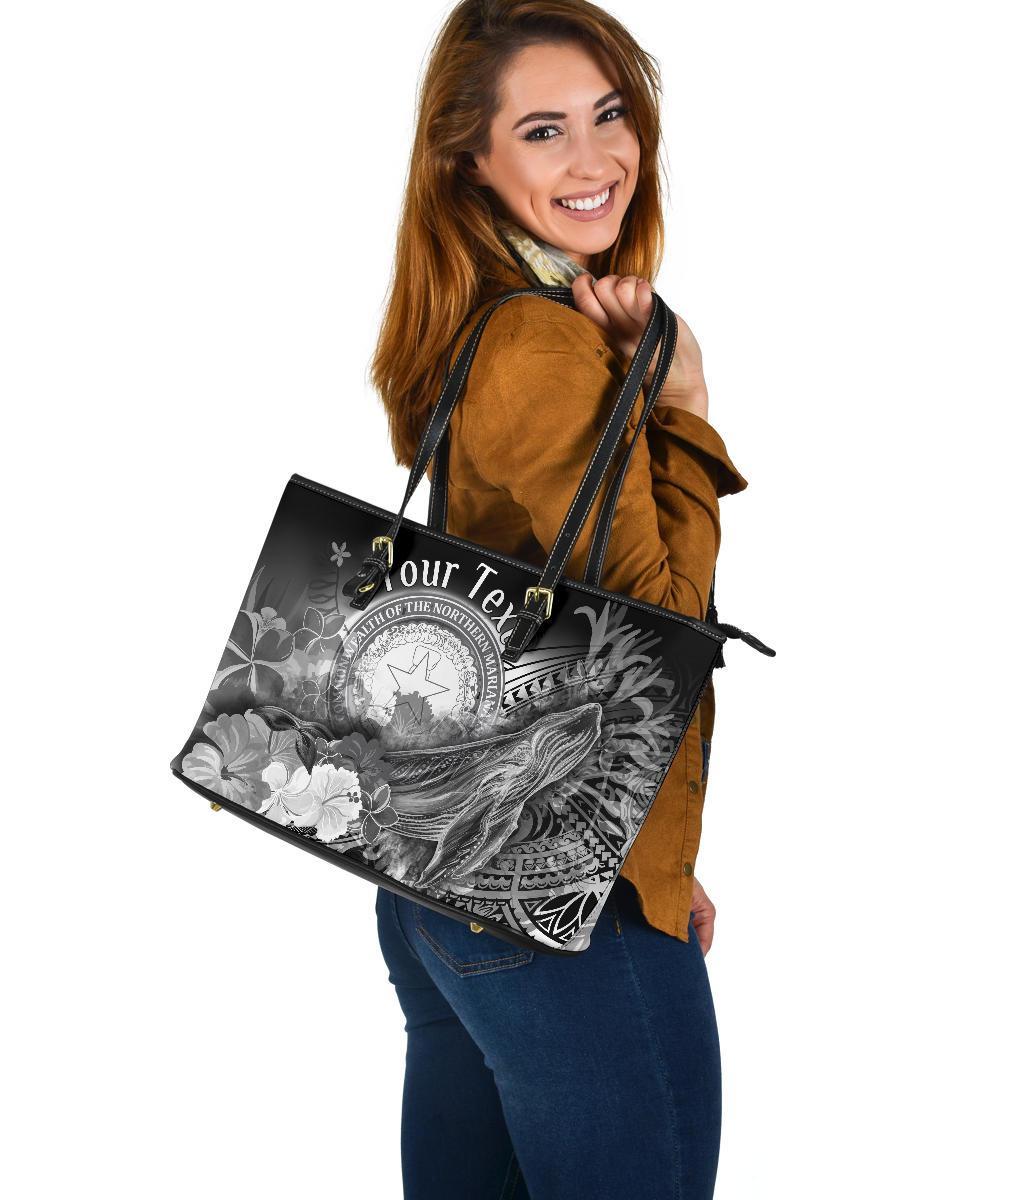 CNMI Custom Personalised Leather Tote Bag - Humpback Whale with Tropical Flowers (White) White - Polynesian Pride